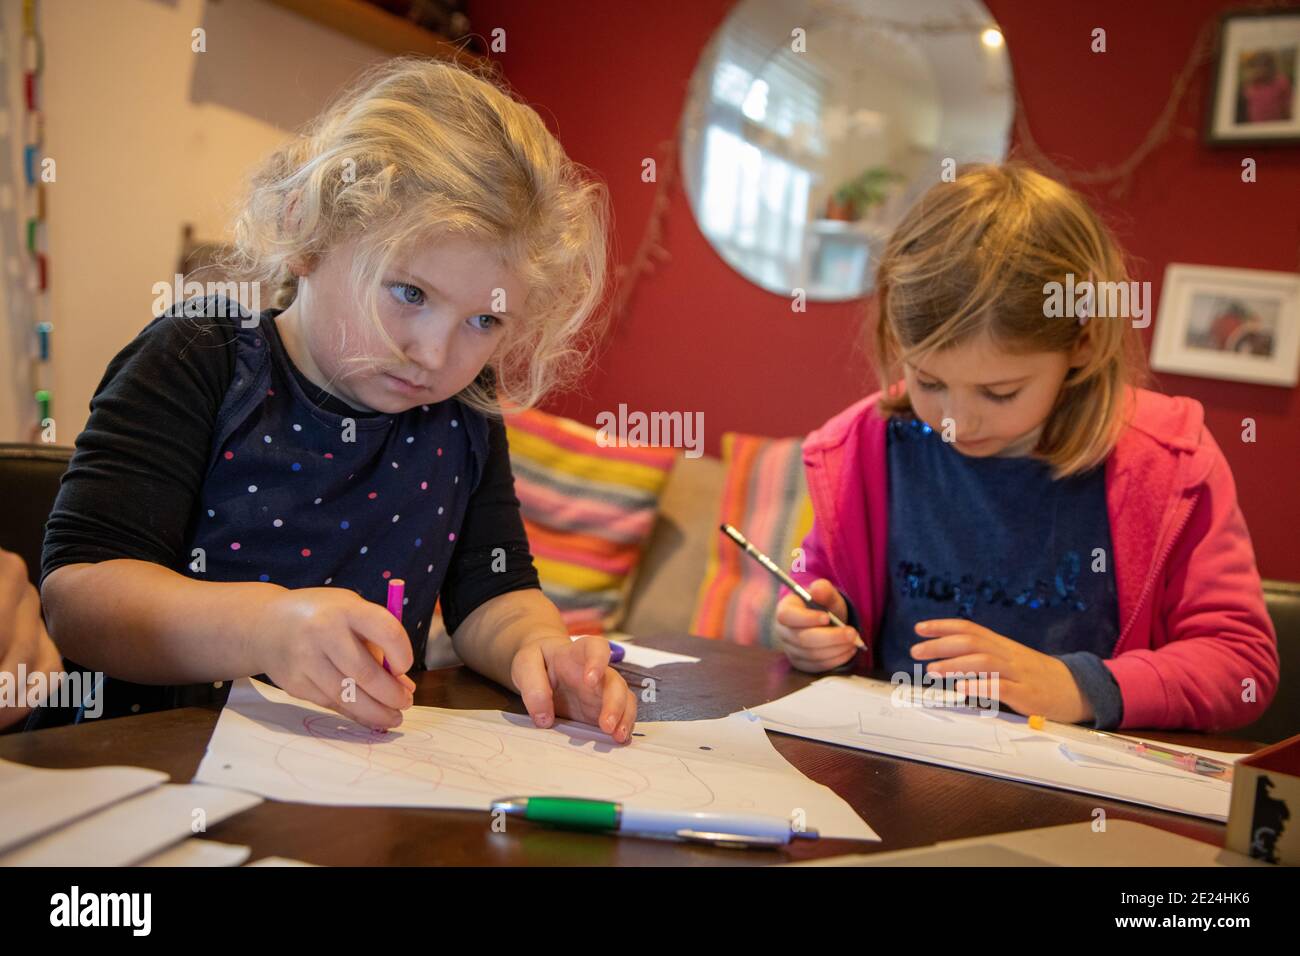 Girls of 3 and 5 years old doing school work  at home during the Covid school closure. Stock Photo